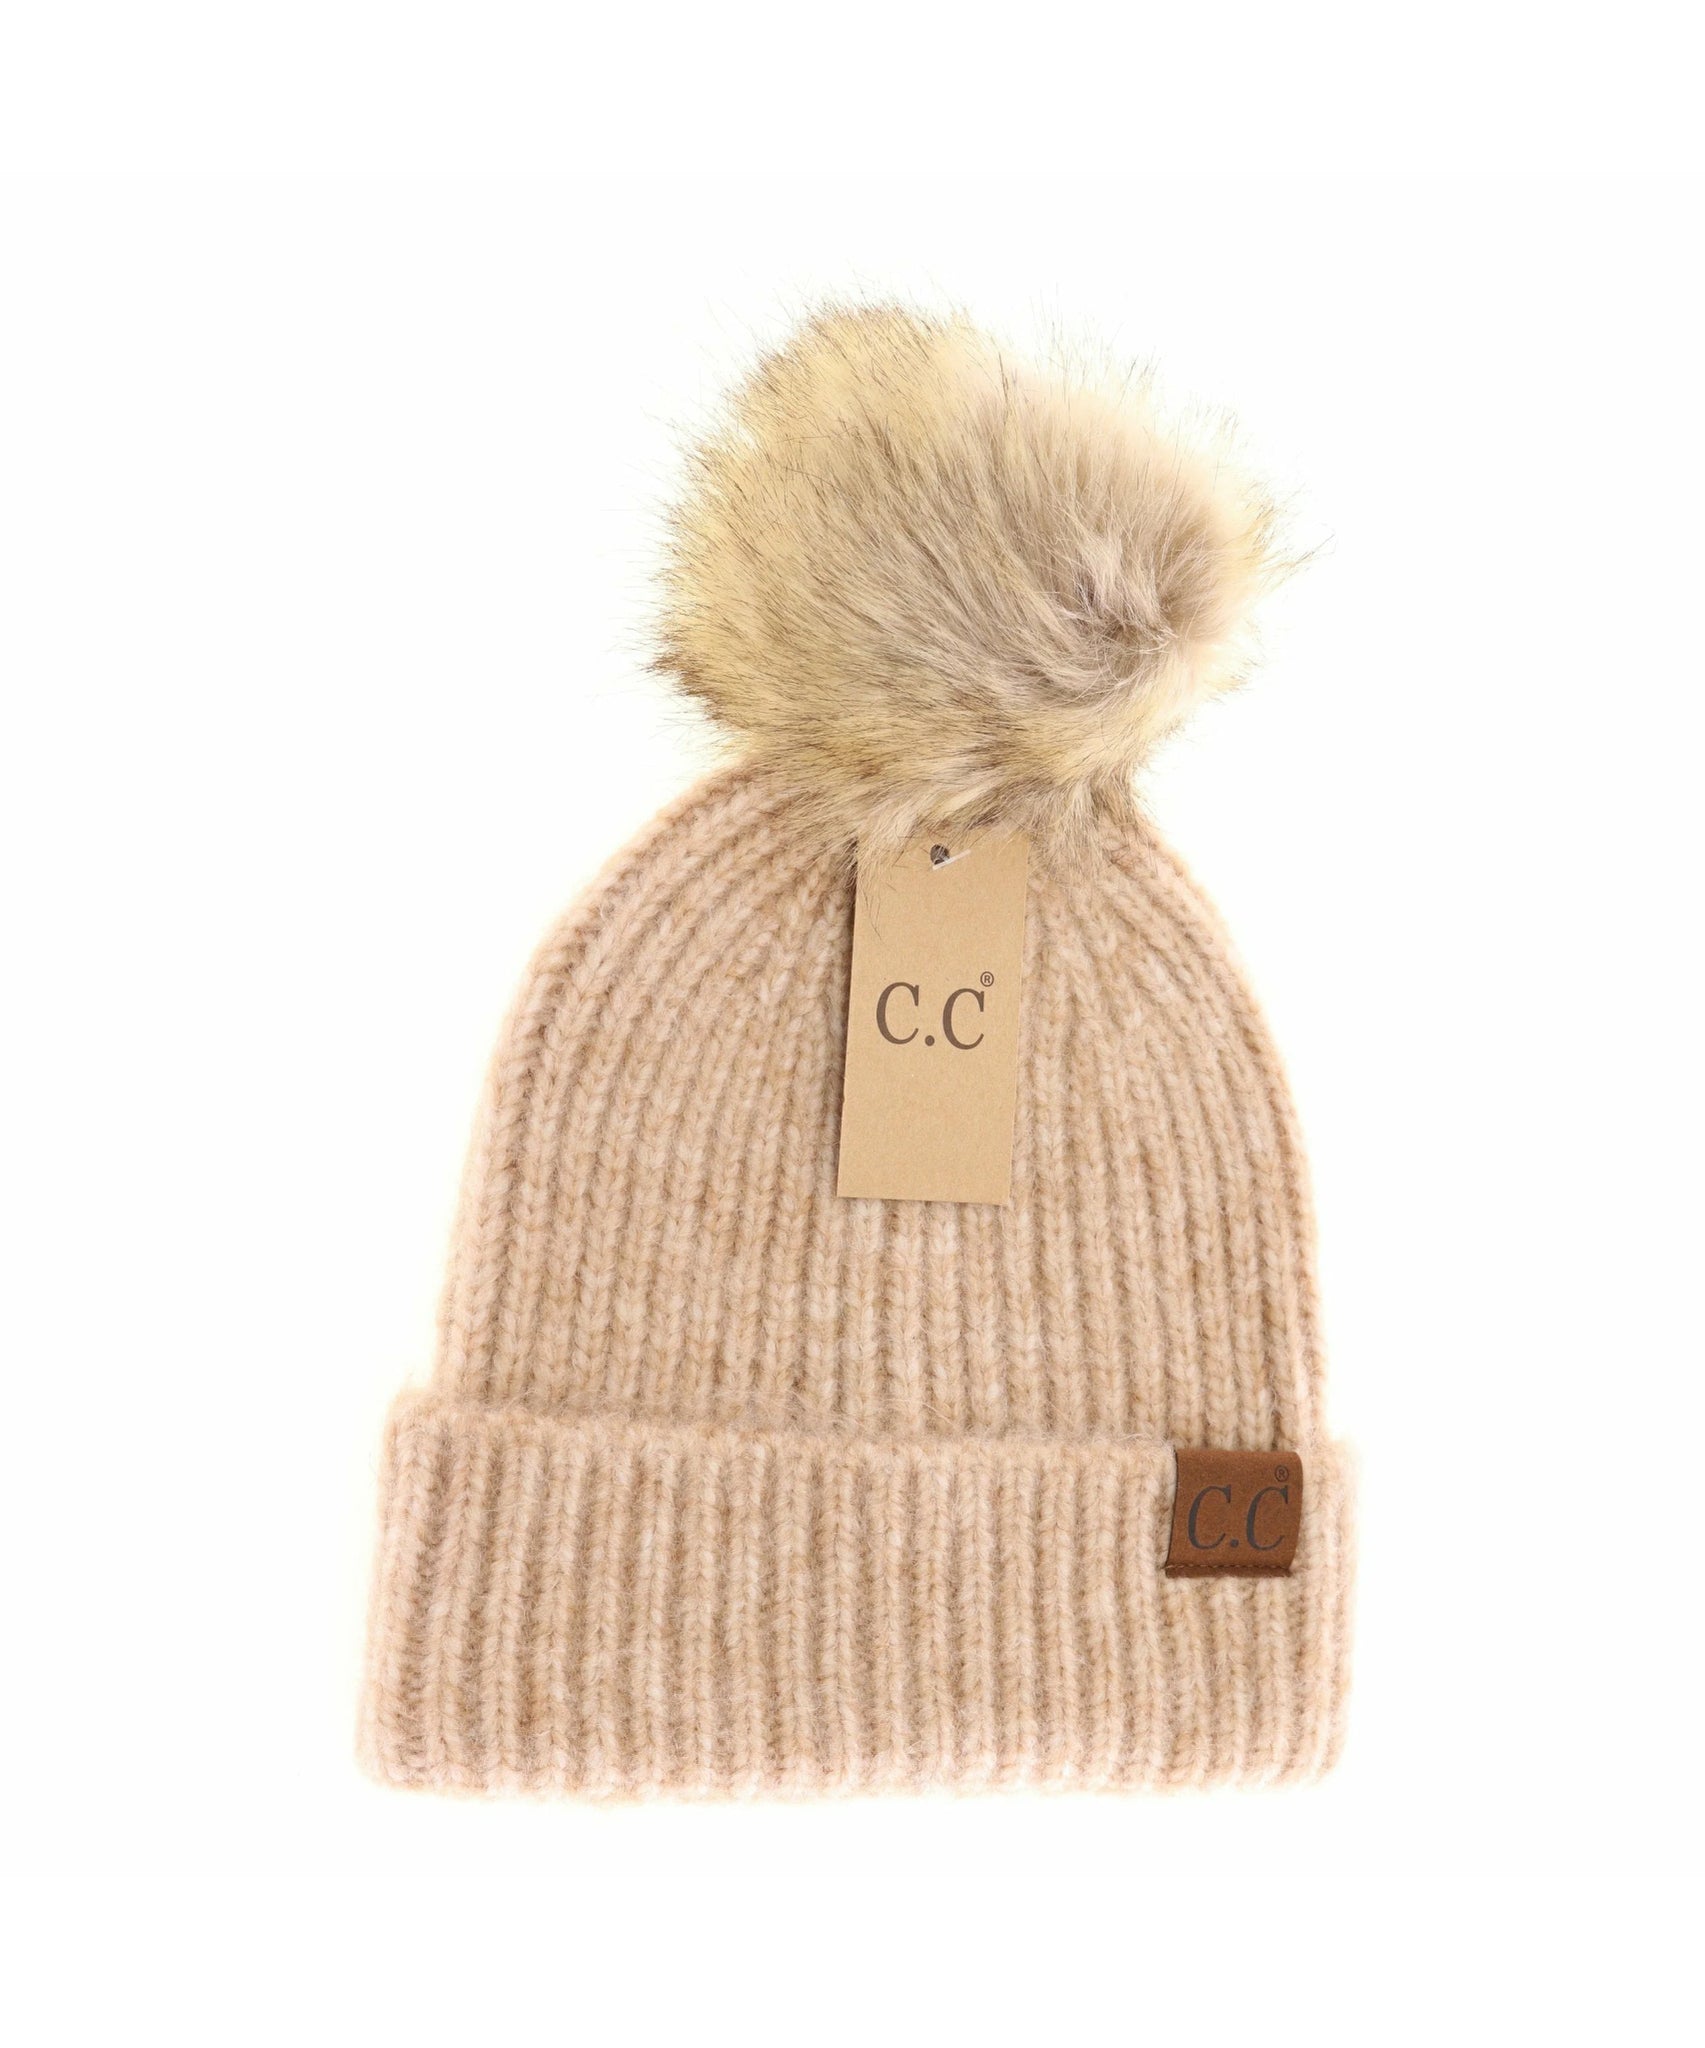 CC Beanie - Soft Ribbed Multi Colored - Sand